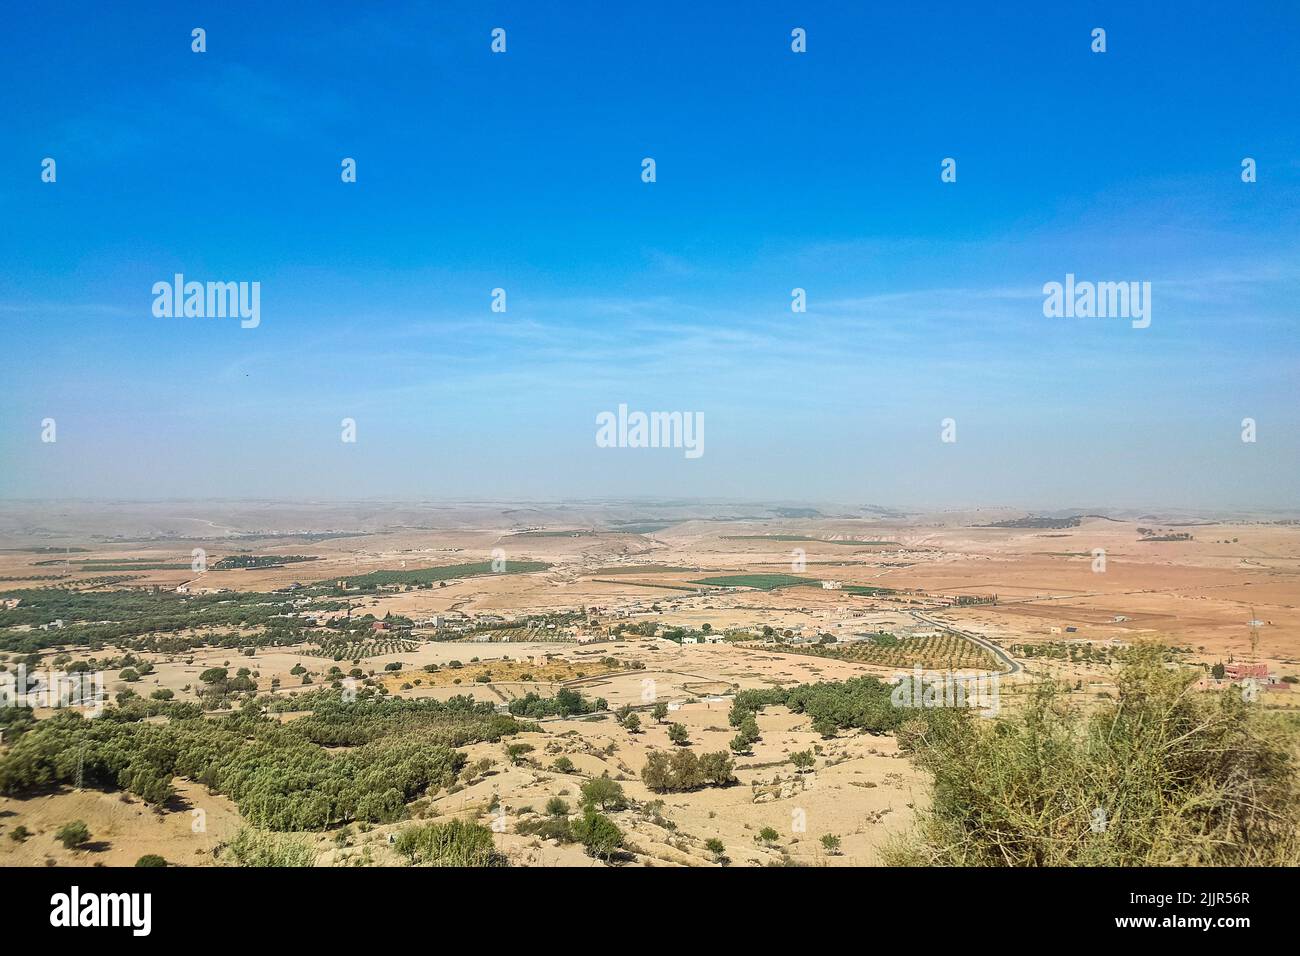 A deserted area before the Atlas Mountains in Marrakech on a sunny day Stock Photo